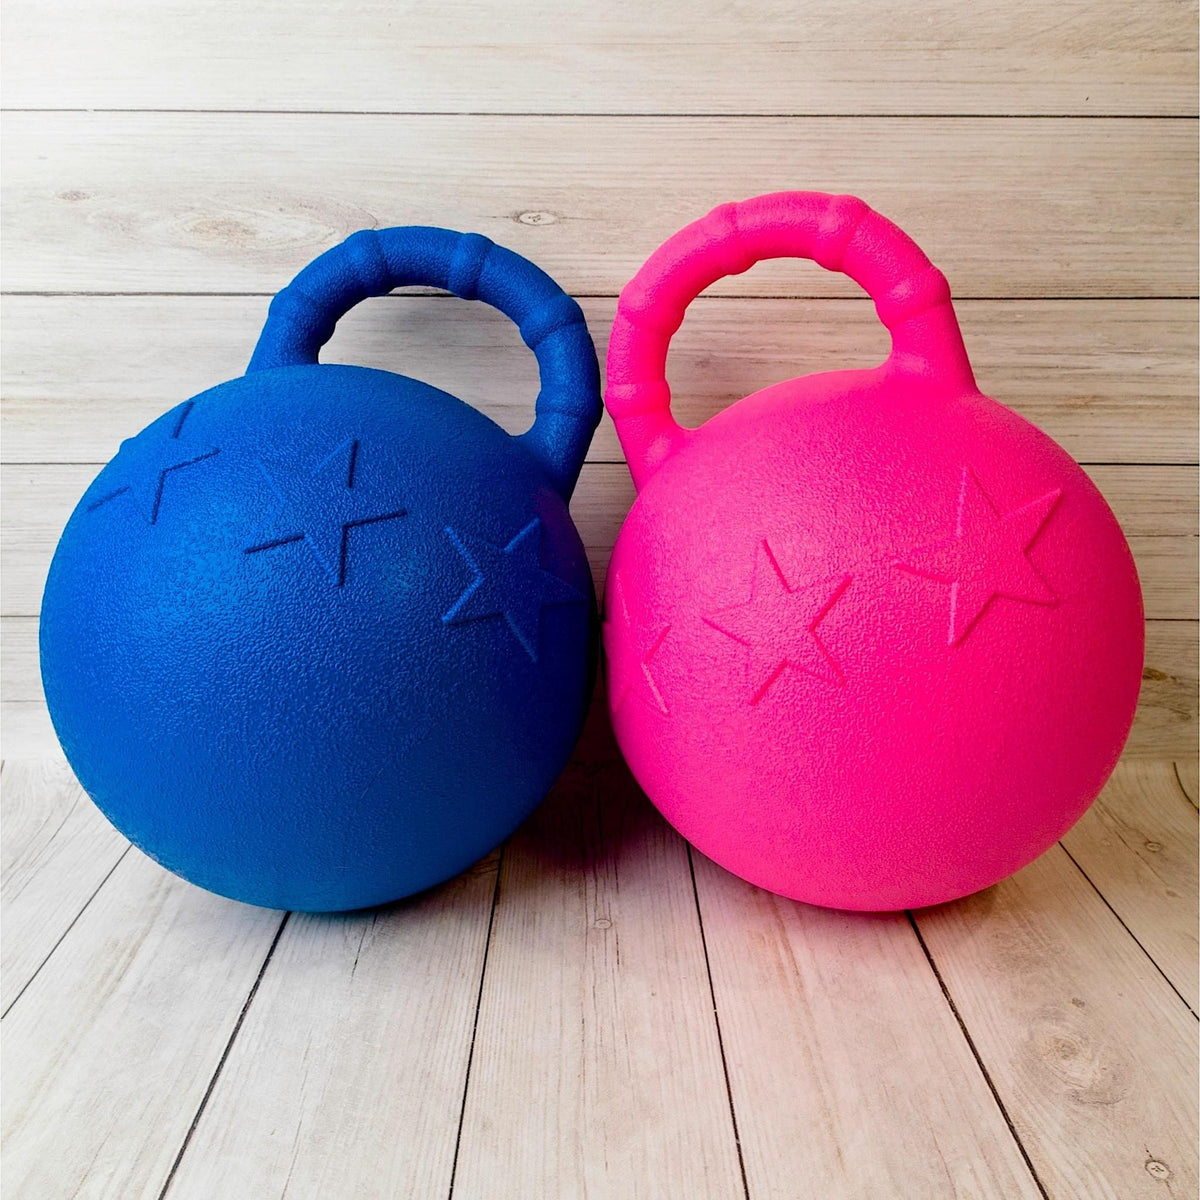 Blue and pink horse play balls with raised stars and curved handles.